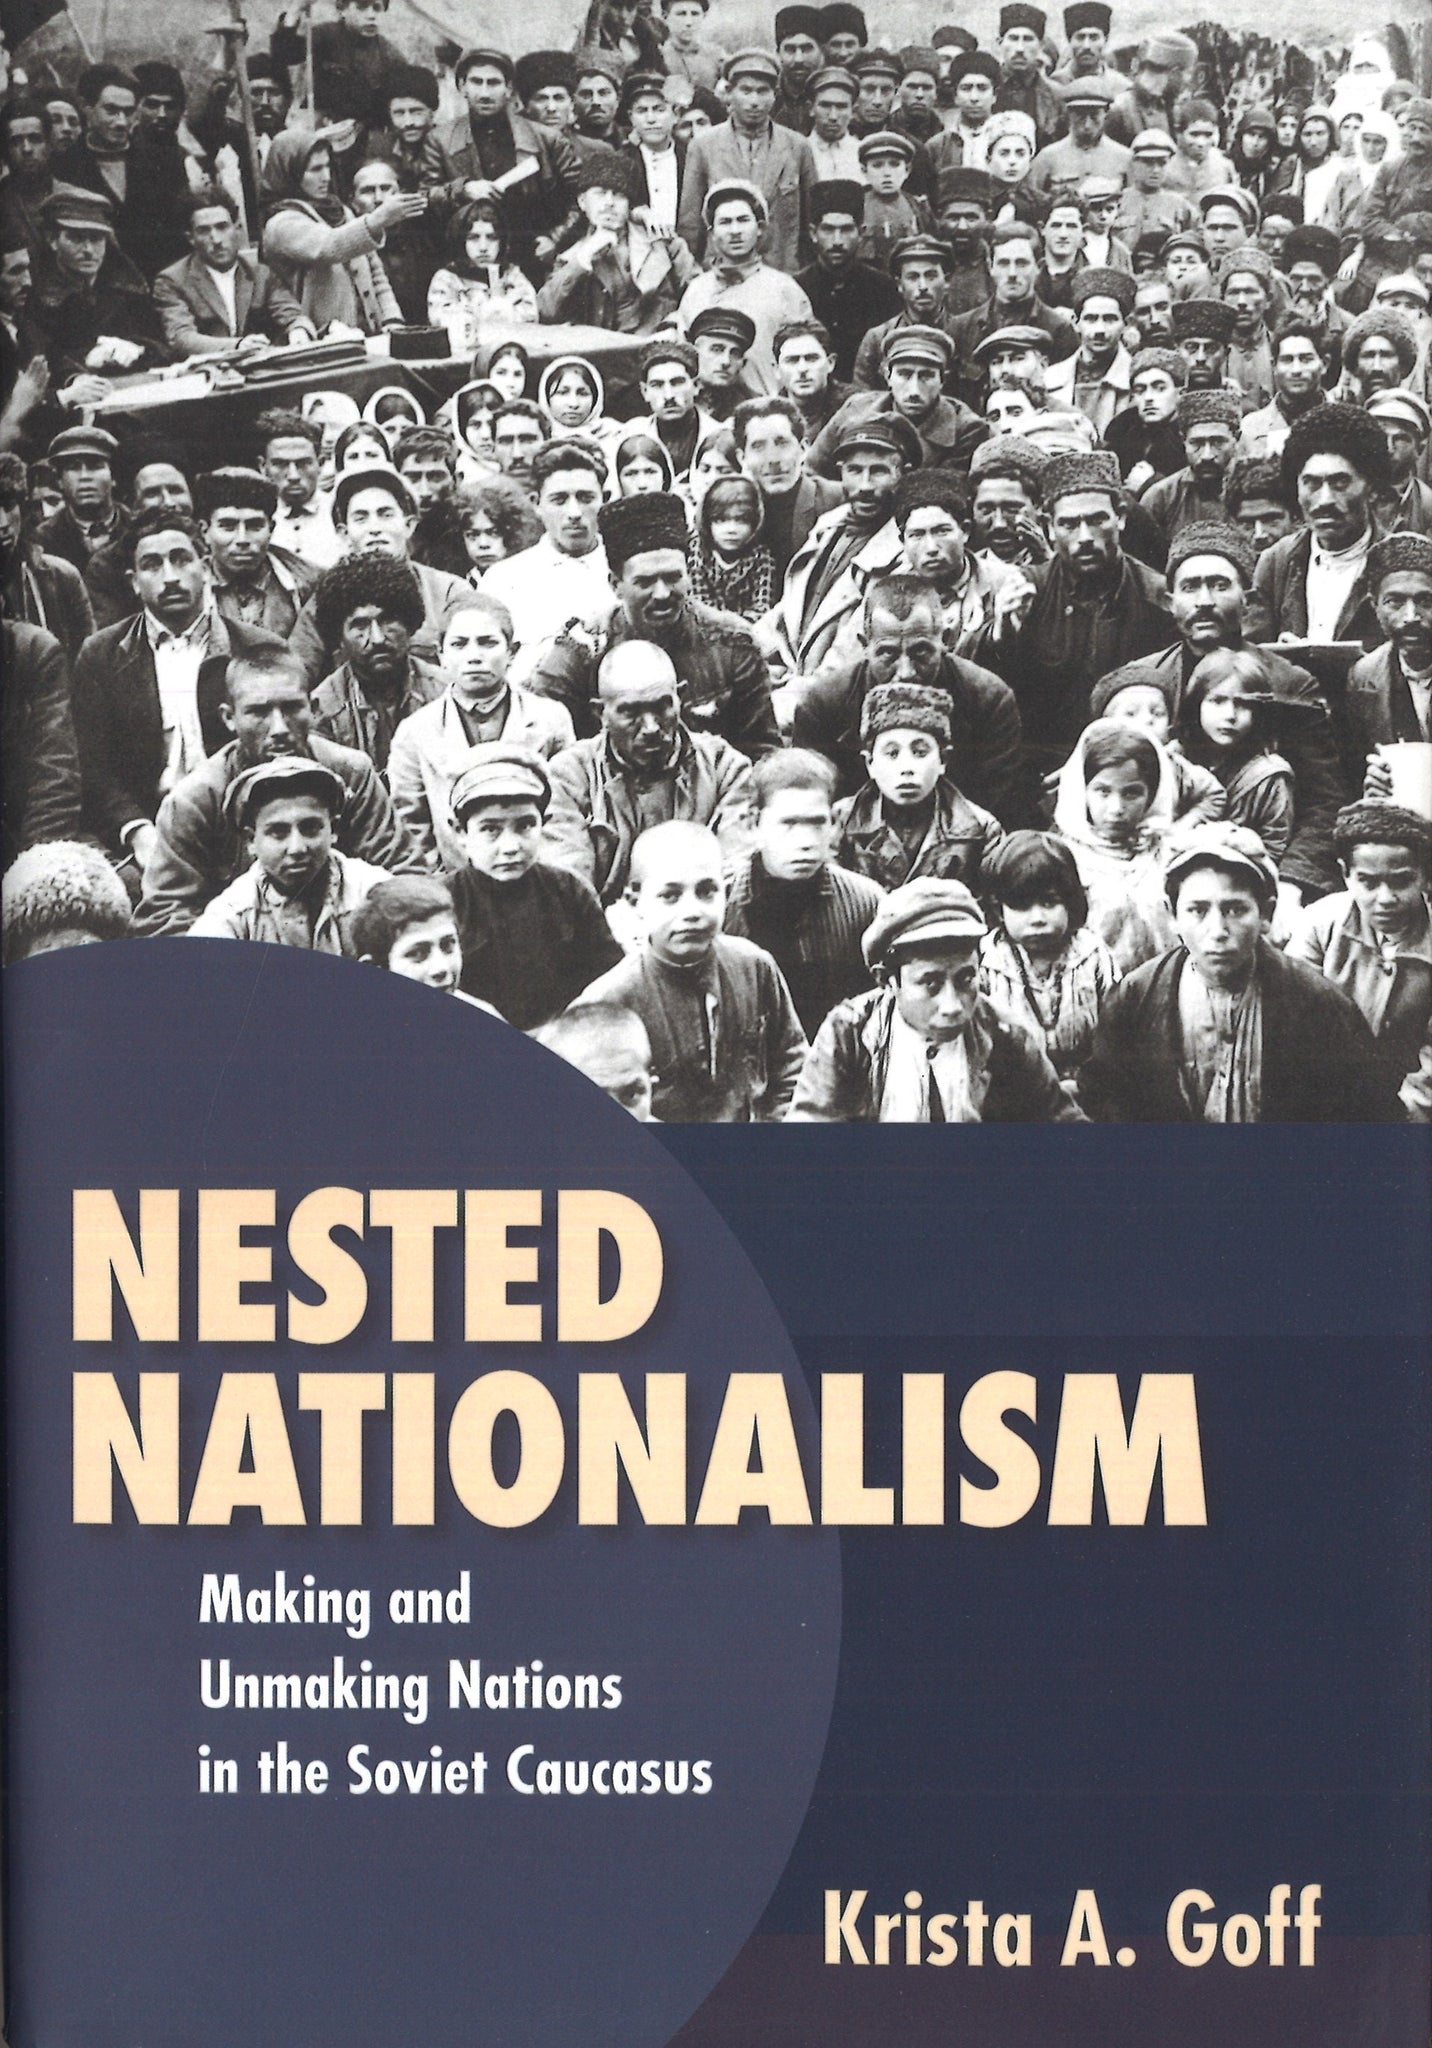 NESTED NATIONALISM: MAKING AND UNMAKING NATIONS IN THE SOVIET CAUCASUS